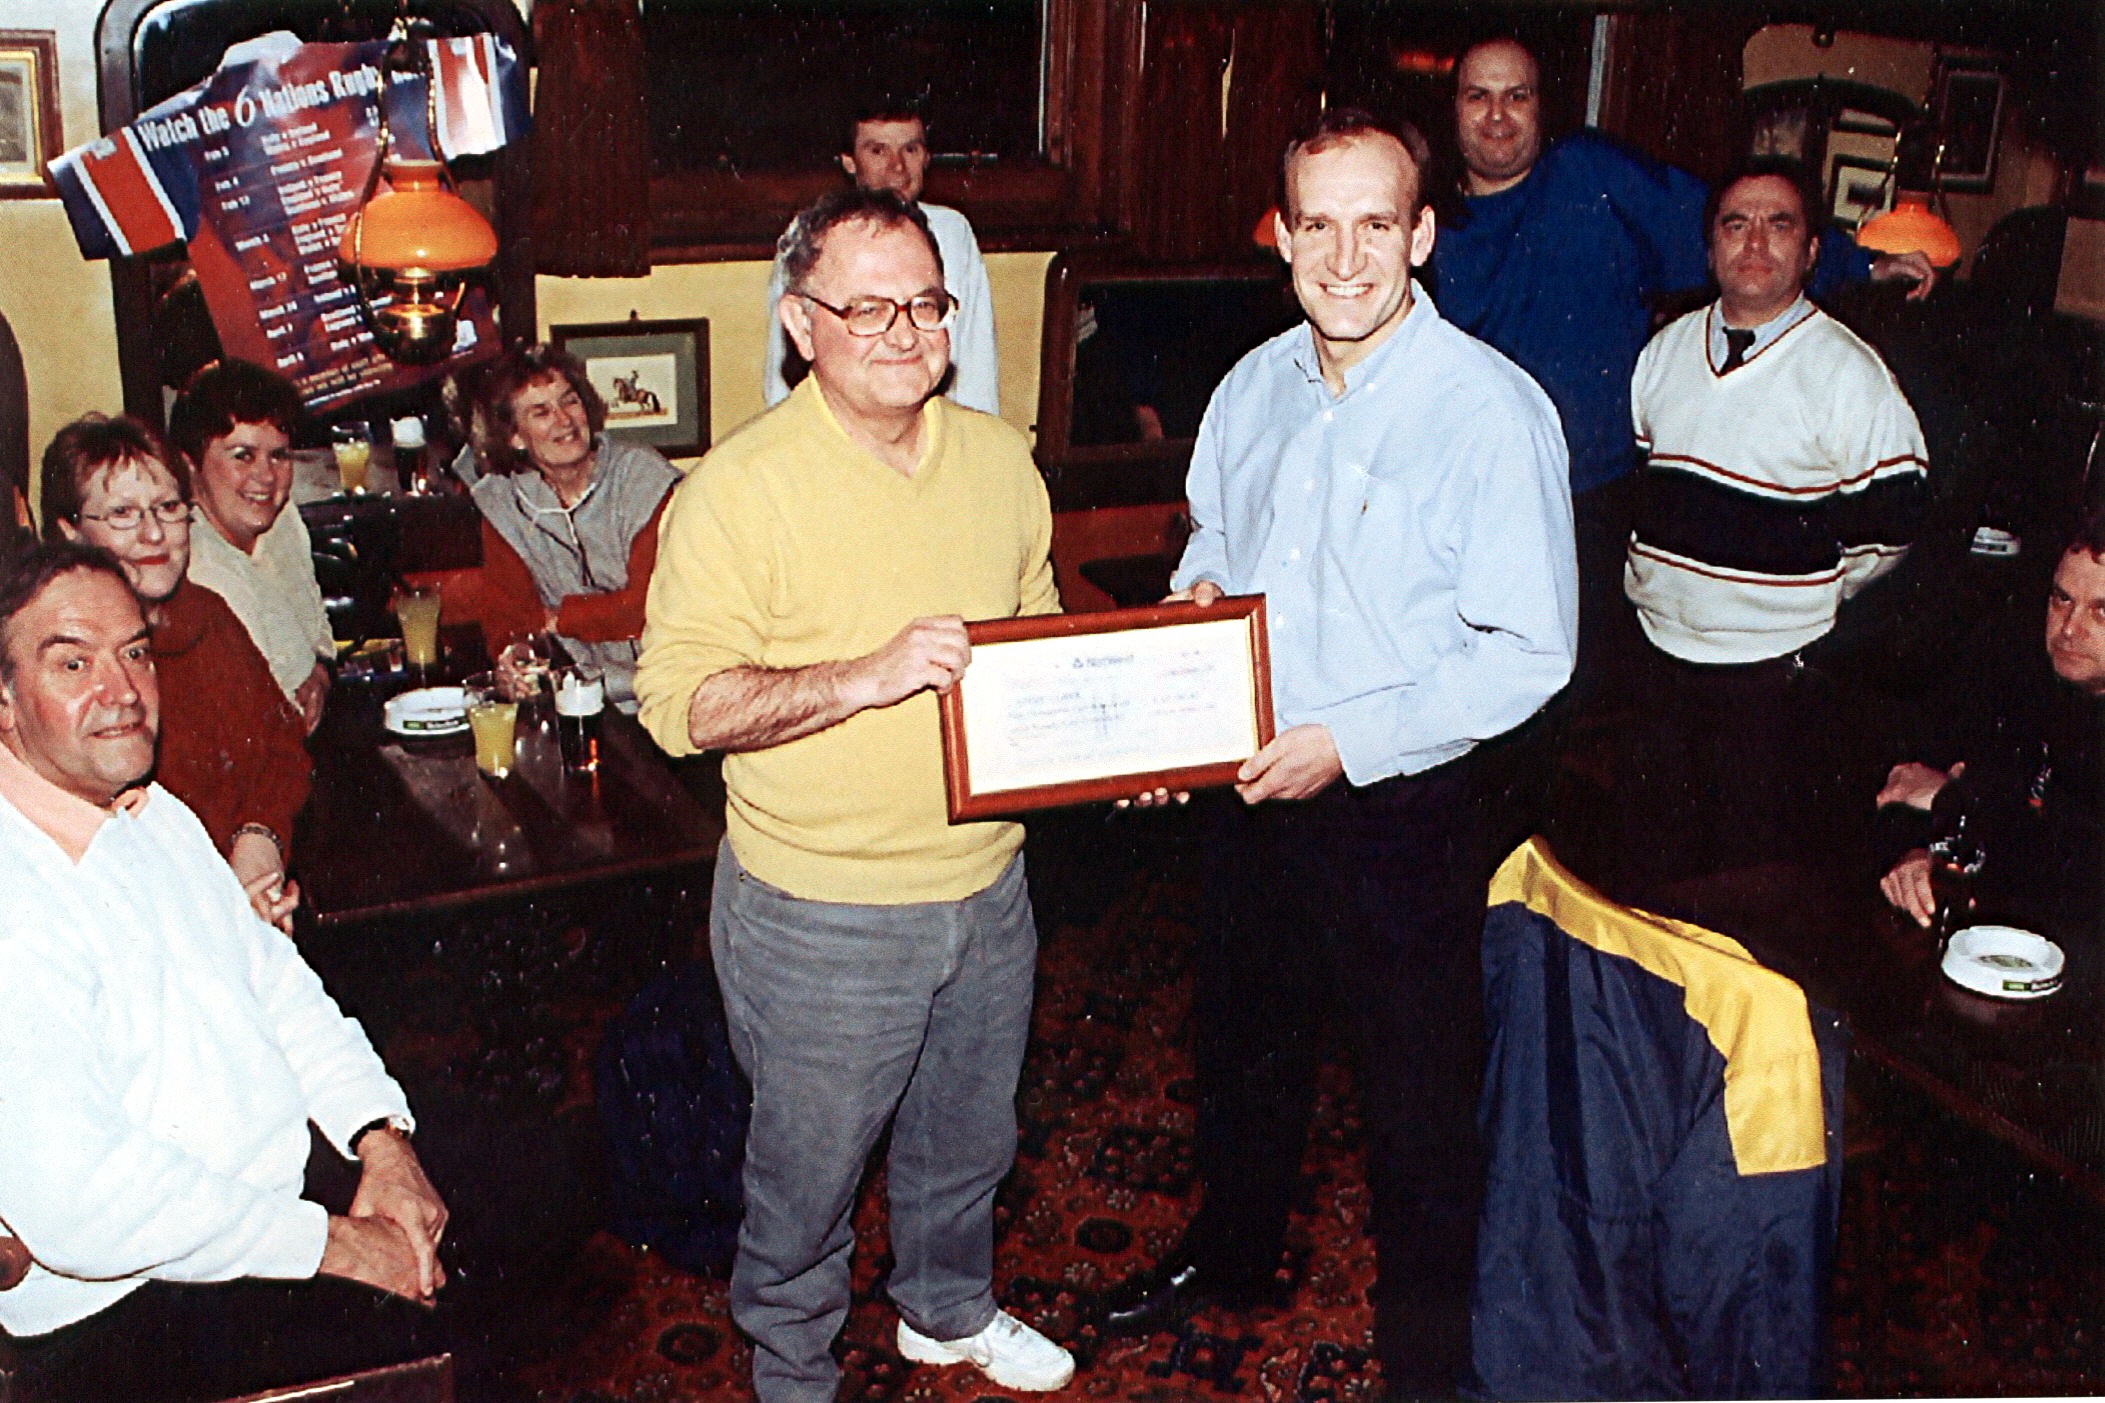 12 Peter Taylor presents cheque to Steve Clark